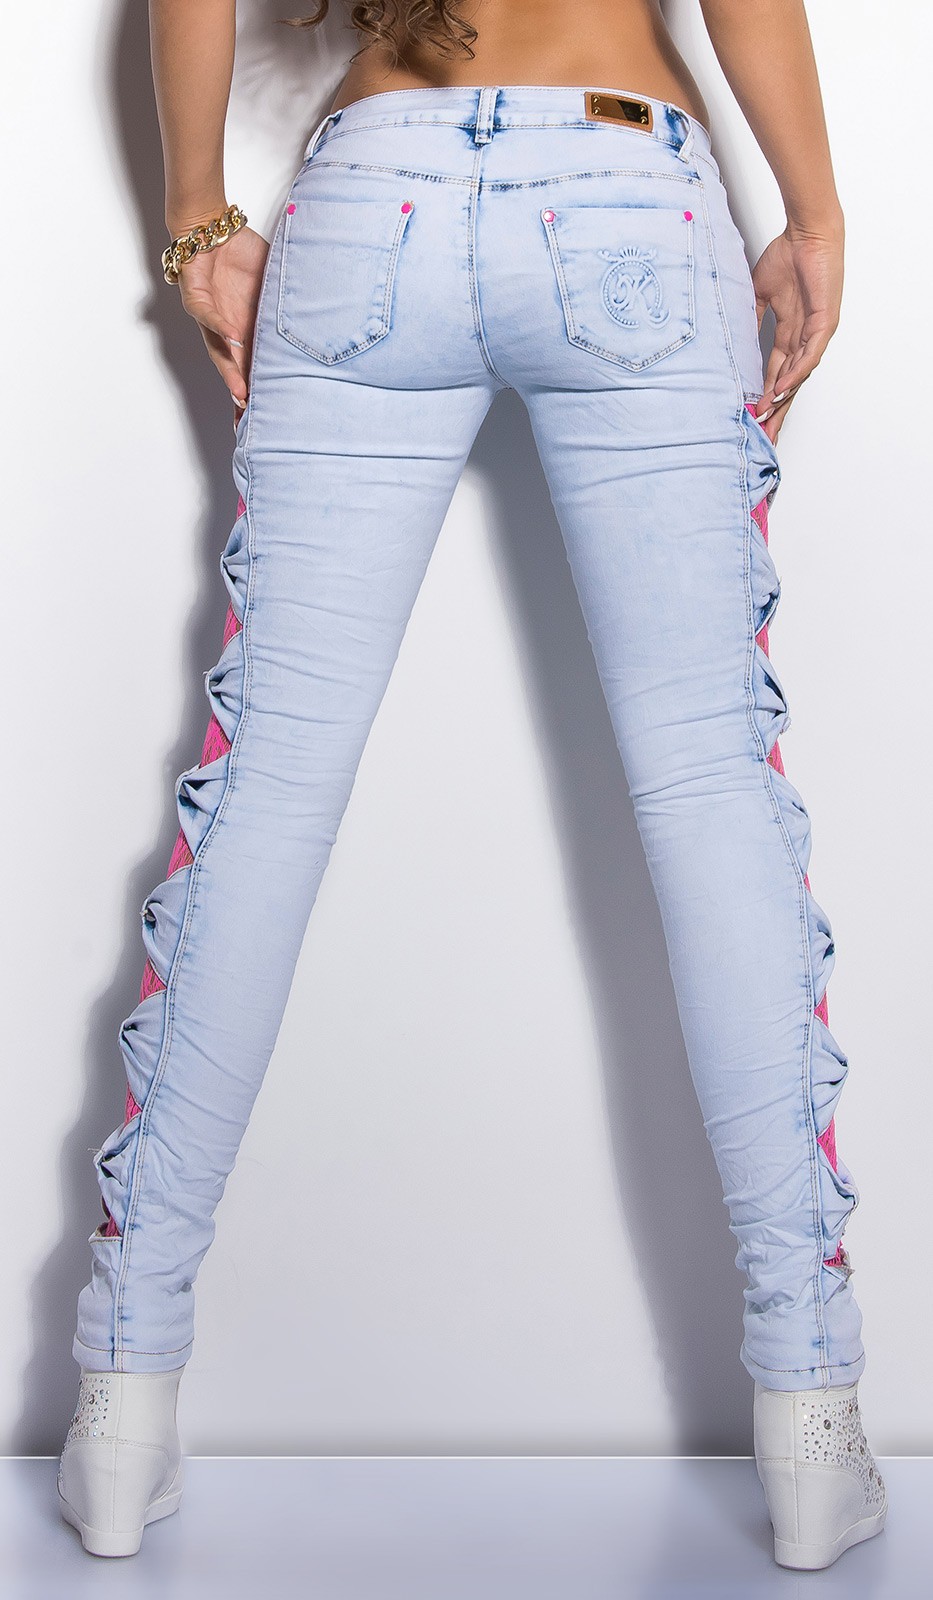 ooKouCka skinny jeans with lace Color JEANSBLUE Size 36 0000K600 155 JEANSBLAU 4